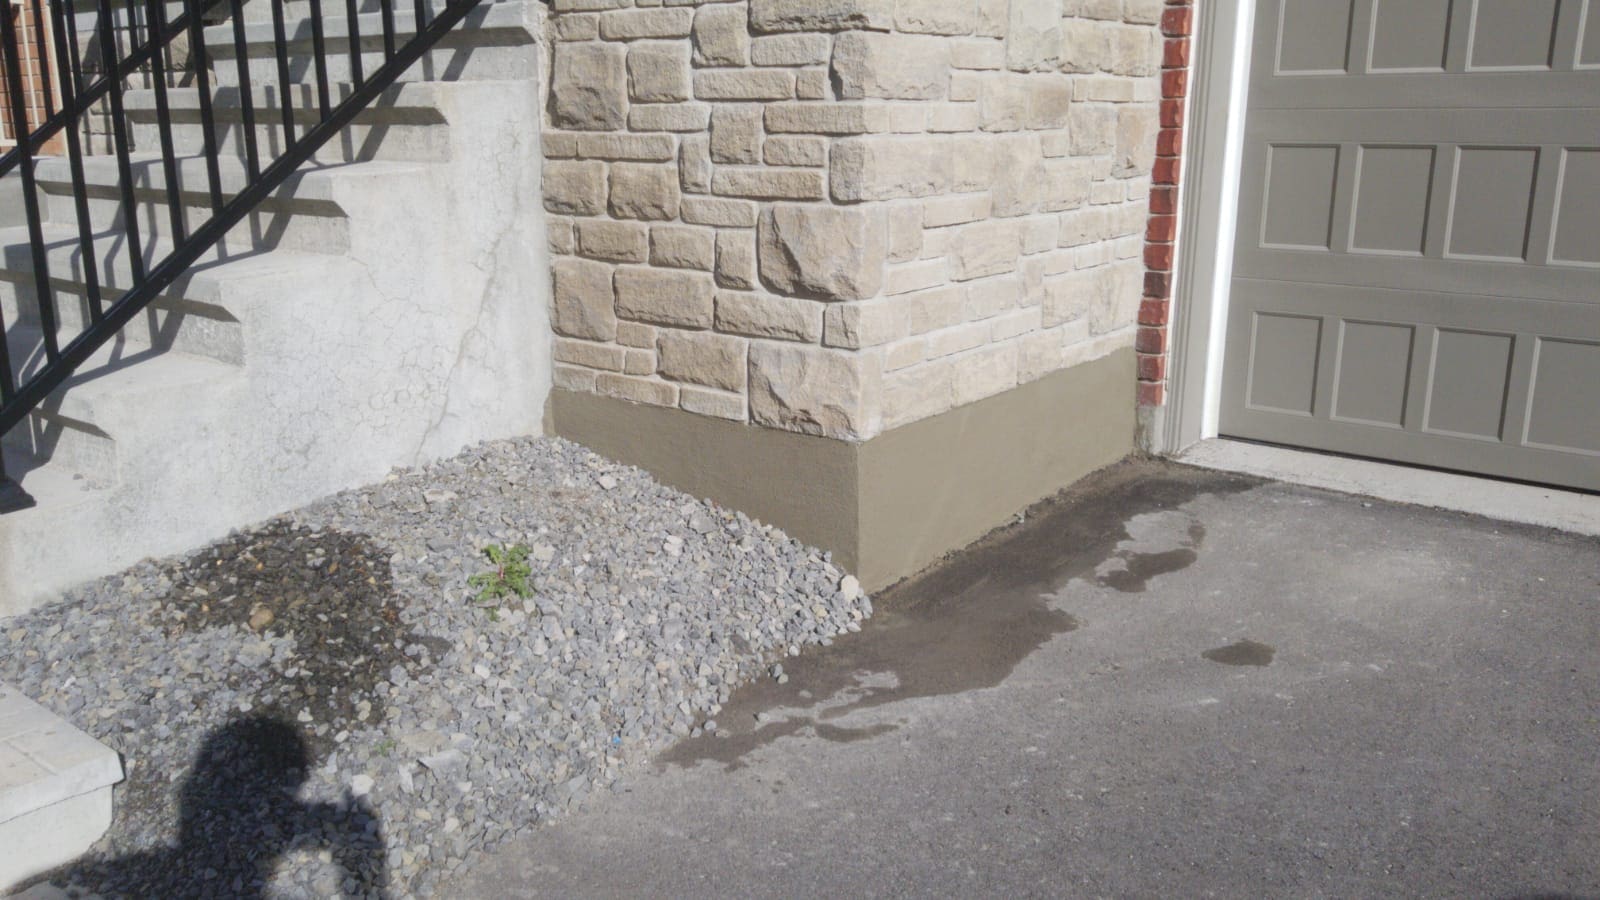 Freshly resurfaced concrete on the bottom of the exterior wall between a deck staircase and the garage